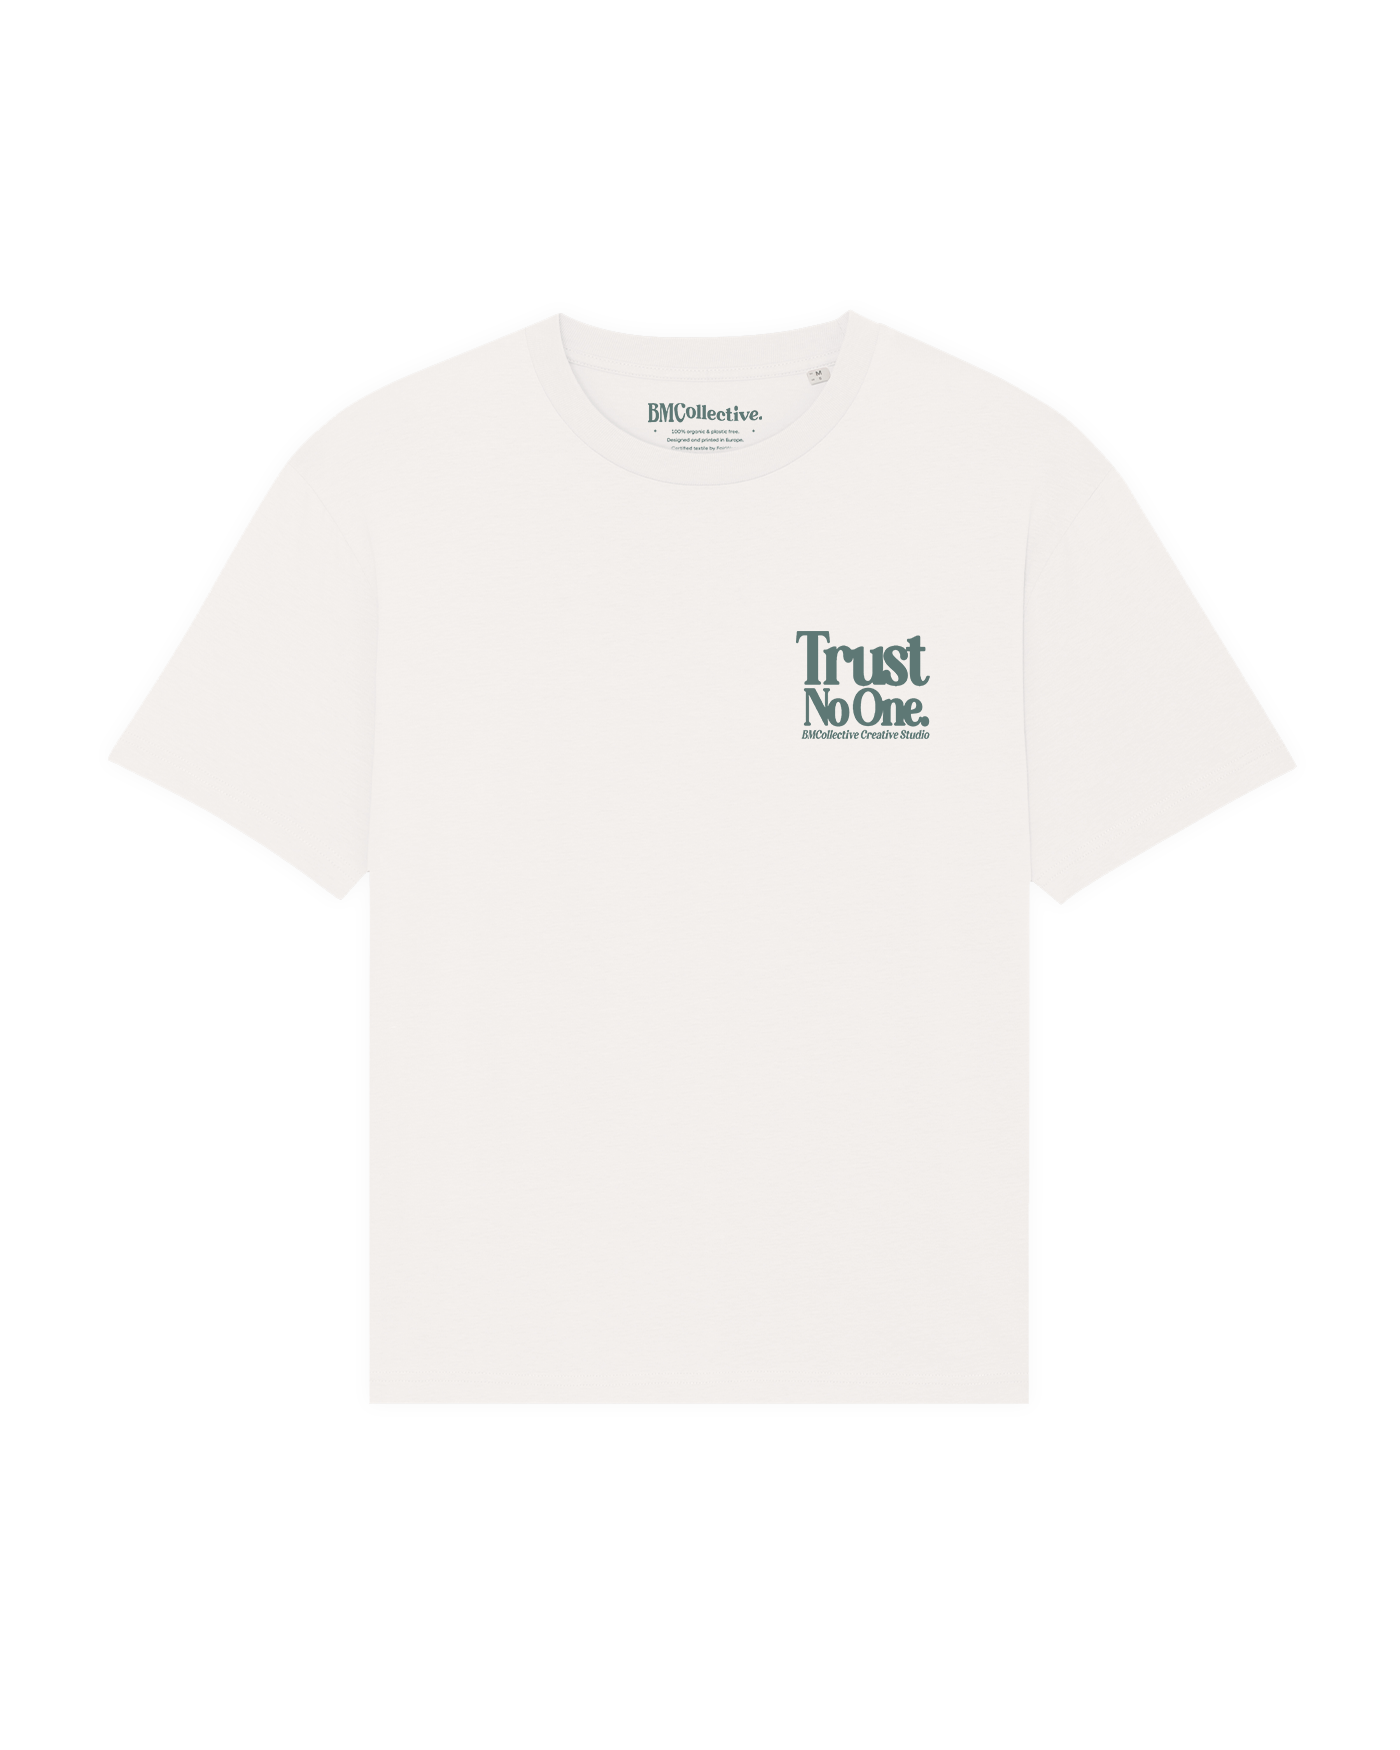 Trust No One Tee – BMCollective